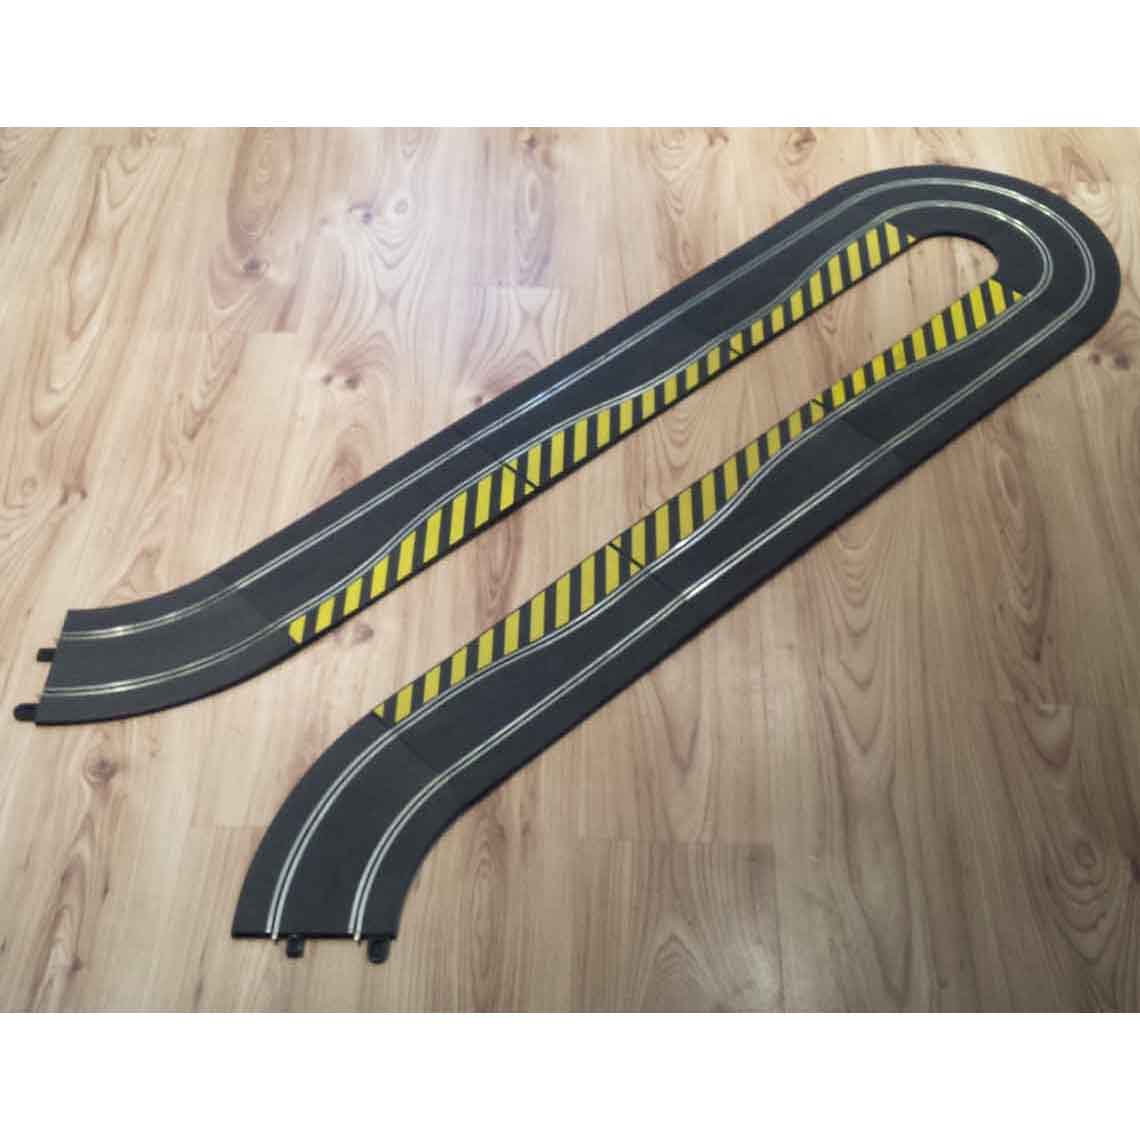 Scalextric Sport 1:32 Track Extension - C8246 C8201 Hairpin Chicane - Action Slot Racing